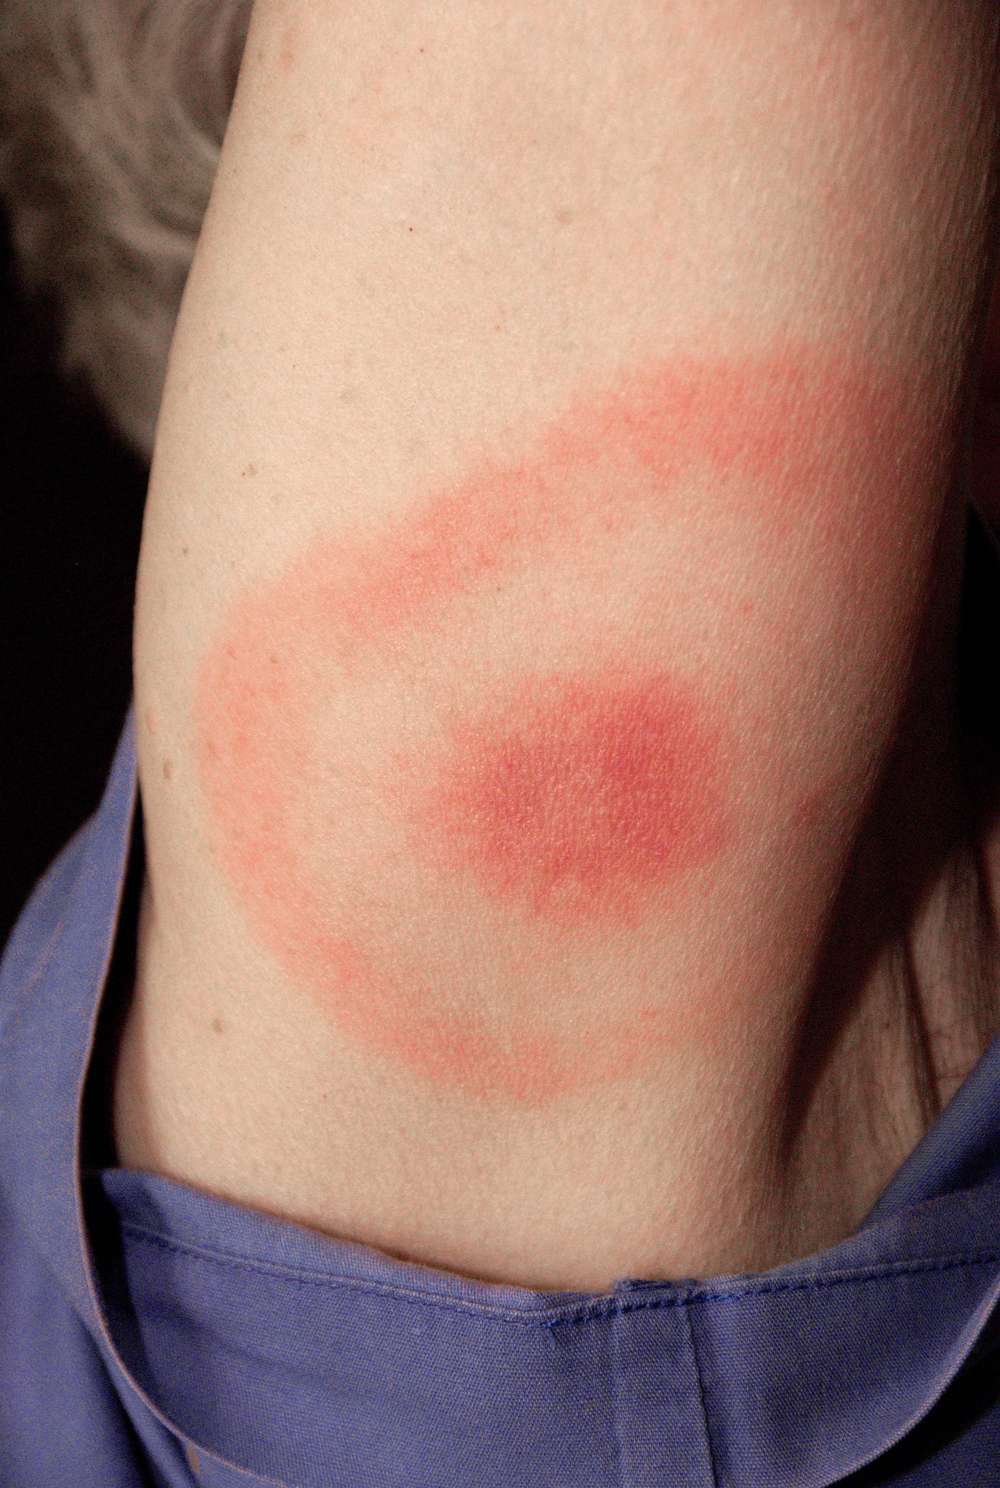 How Much Lyme Disease Are We Living With?